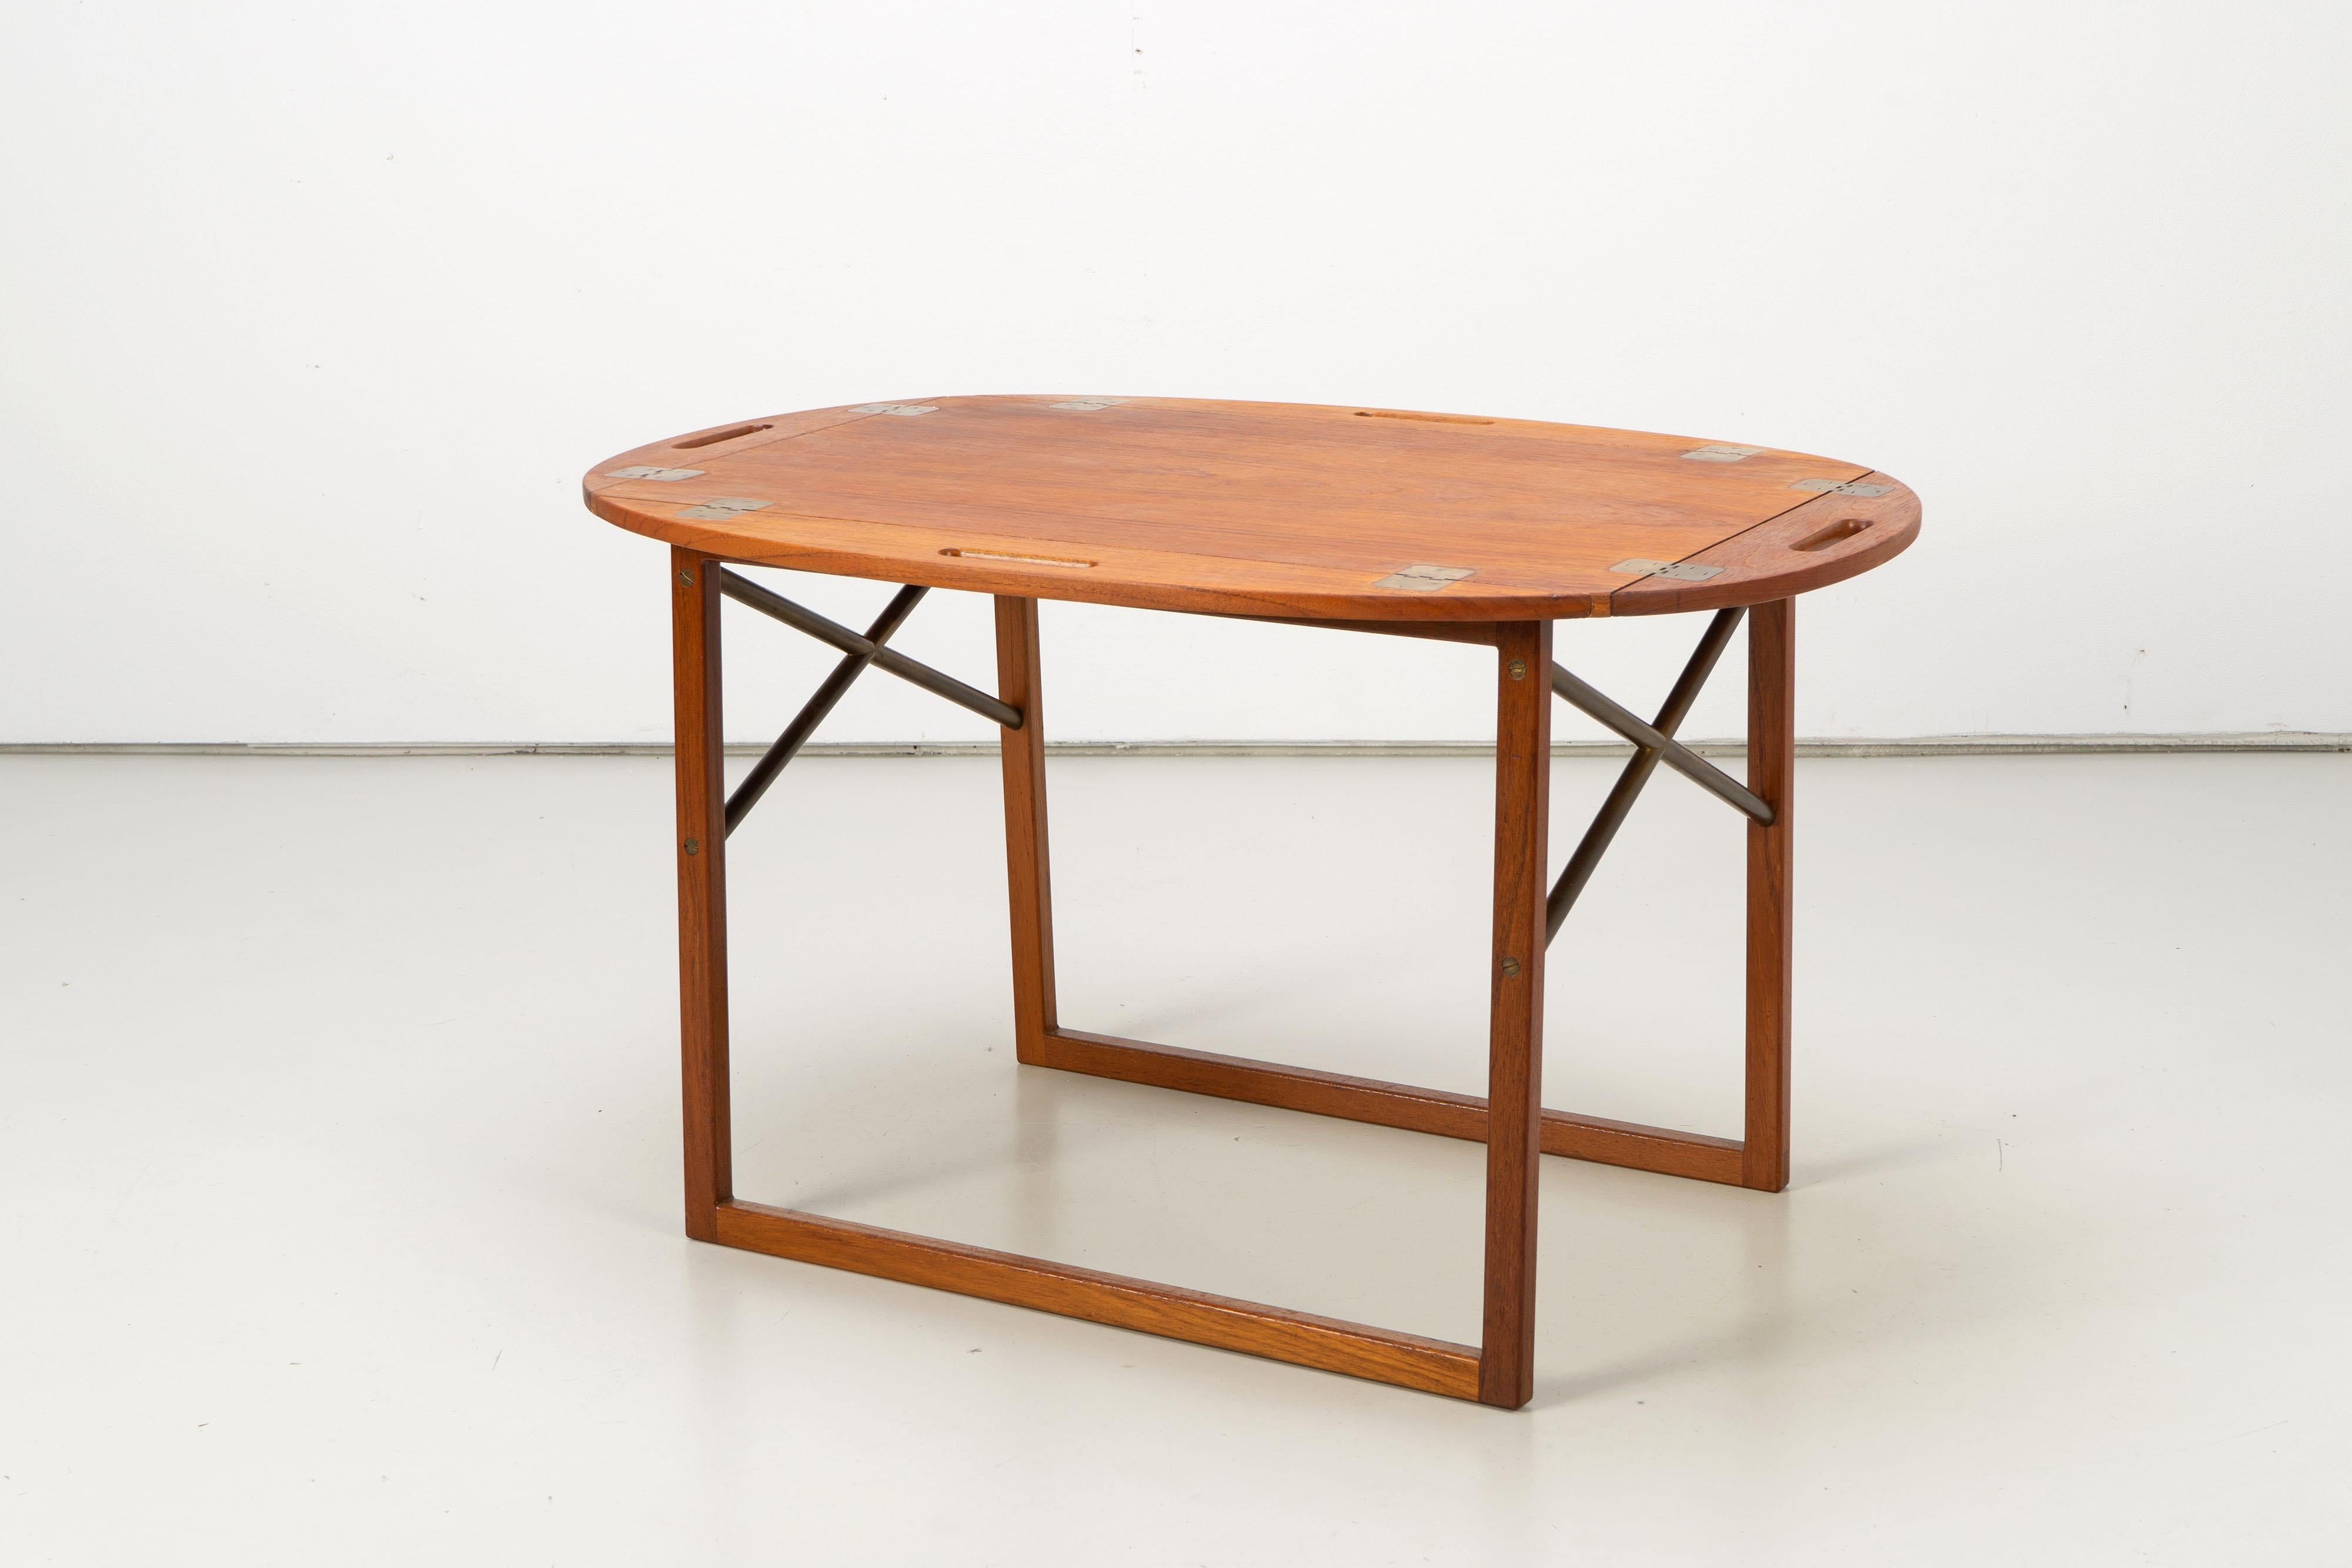 Scandinavian Modern Danish Tray Table by Svend Langkilde for Illums Bolighus Teak and Brass, 1960s For Sale